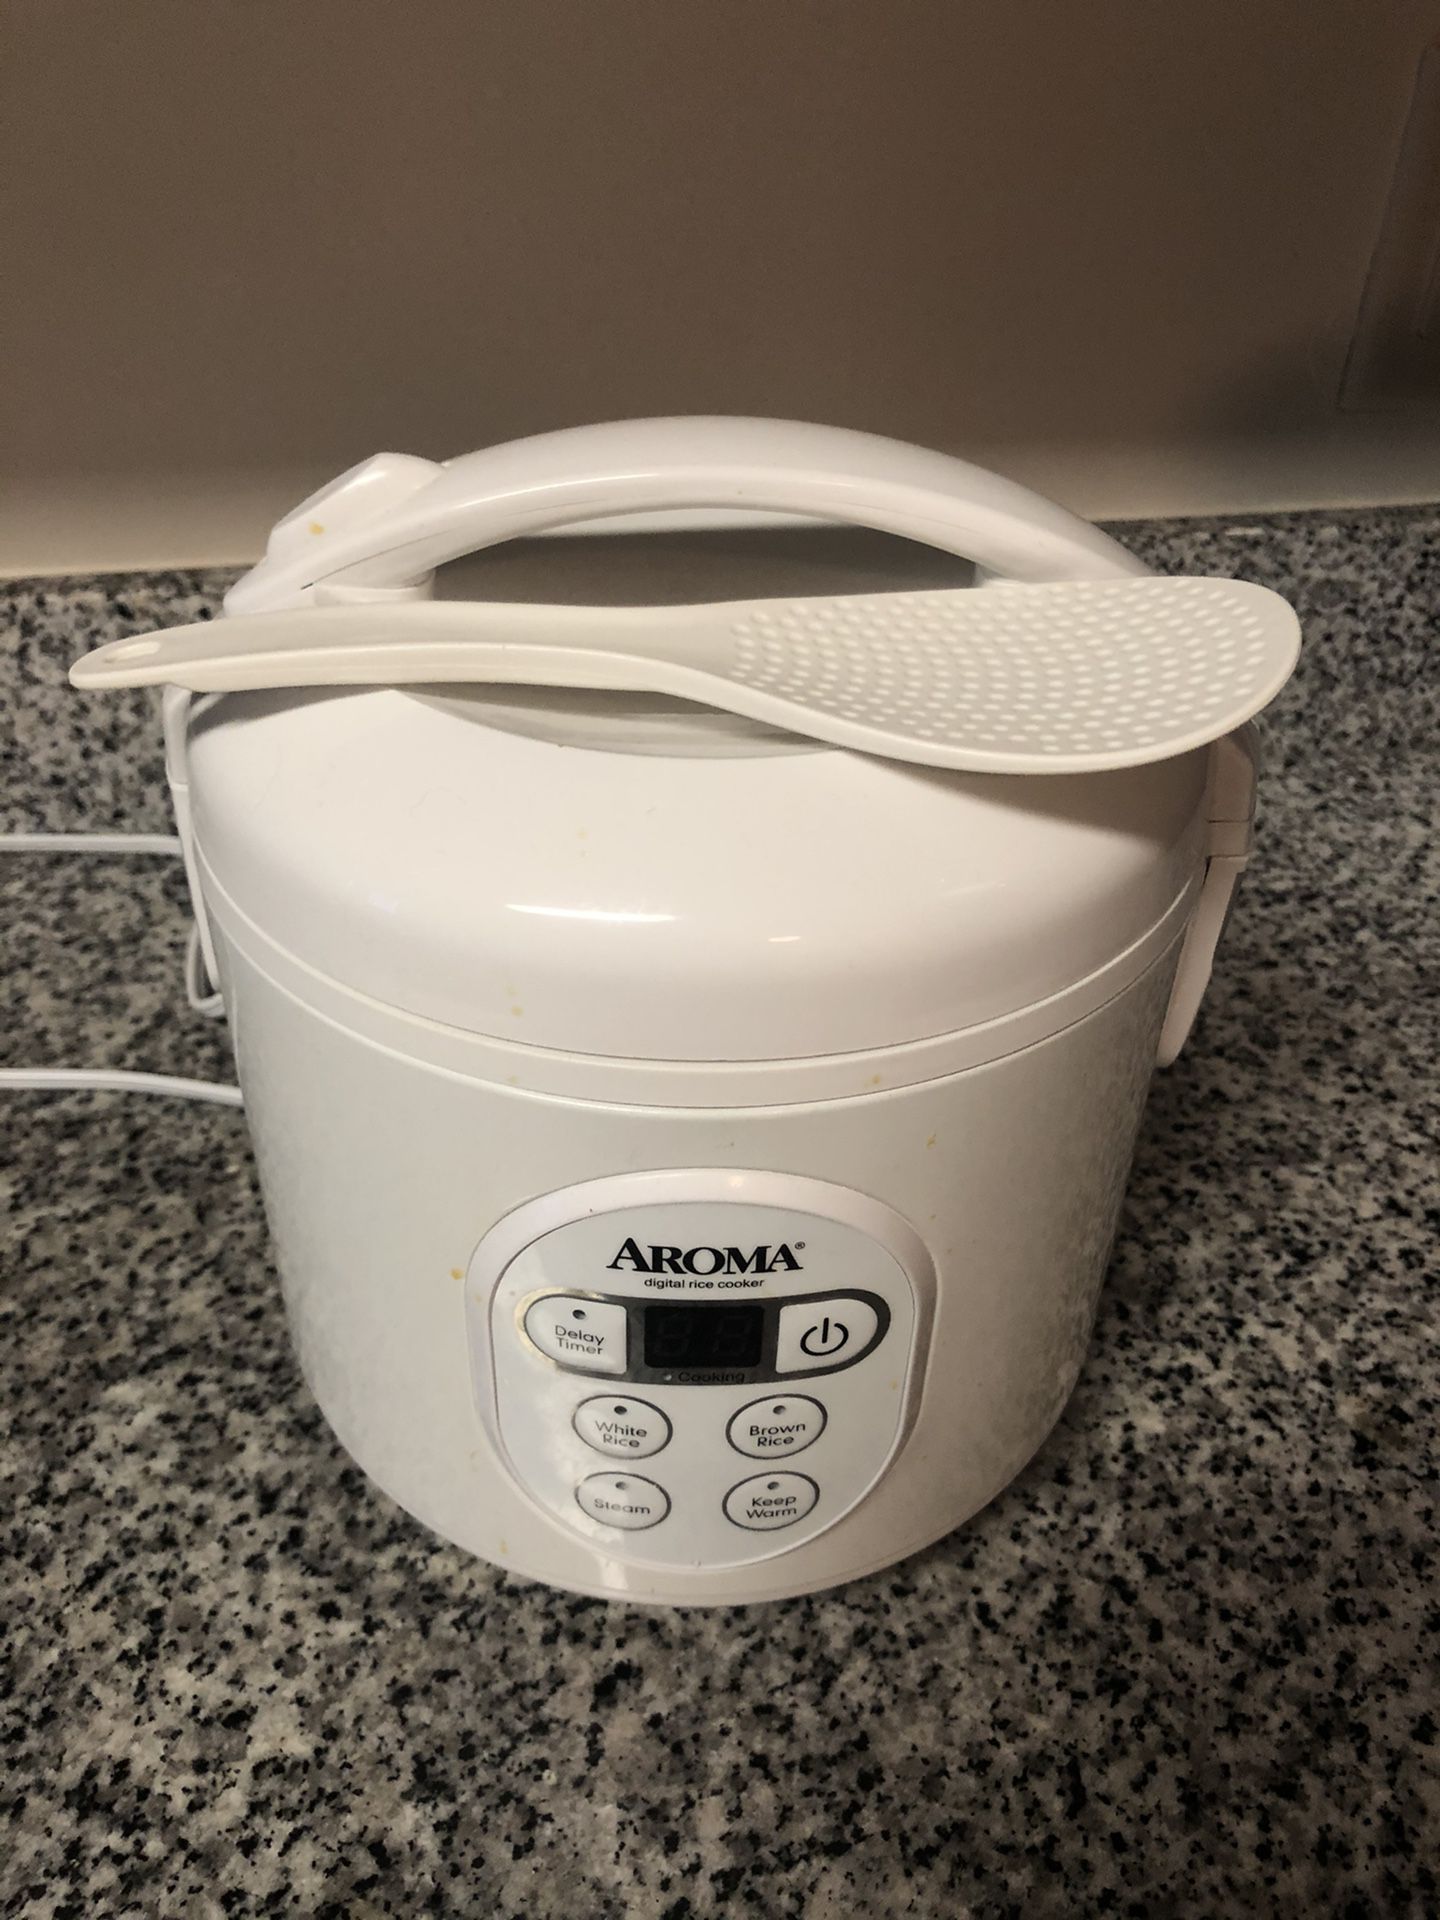 Rice Cooker - Very clean and lightly used